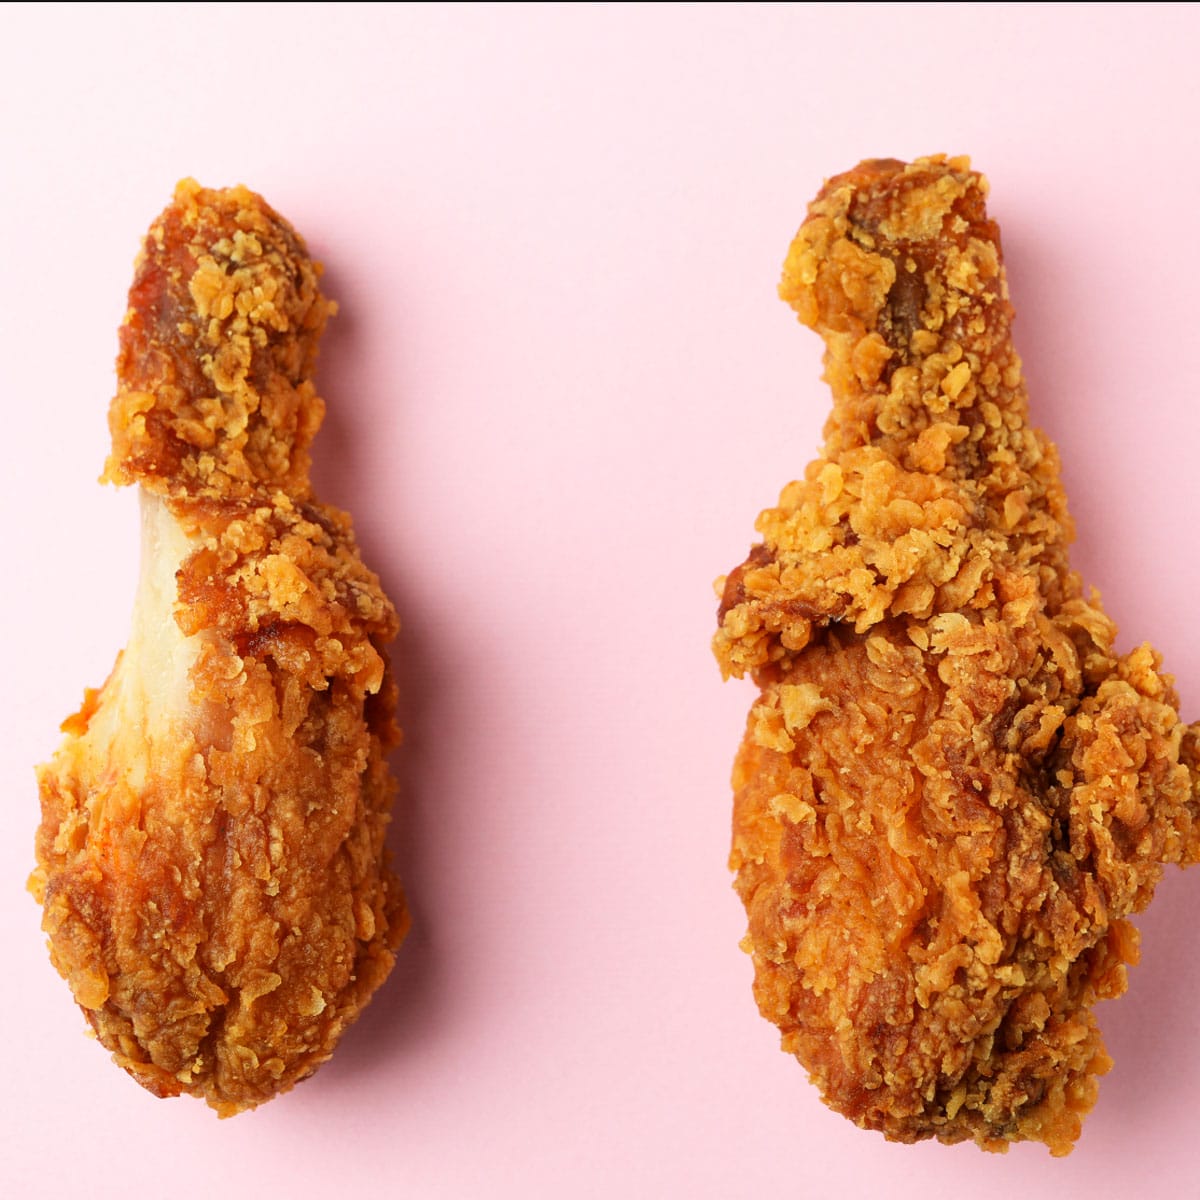 The drumstick is the lower Leg of the chicken and is made up of two parts: the thigh and the calf. Similar to the thigh, it is a fattier and tougher cut, so it's best suited for cooking methods like braising or stewing.